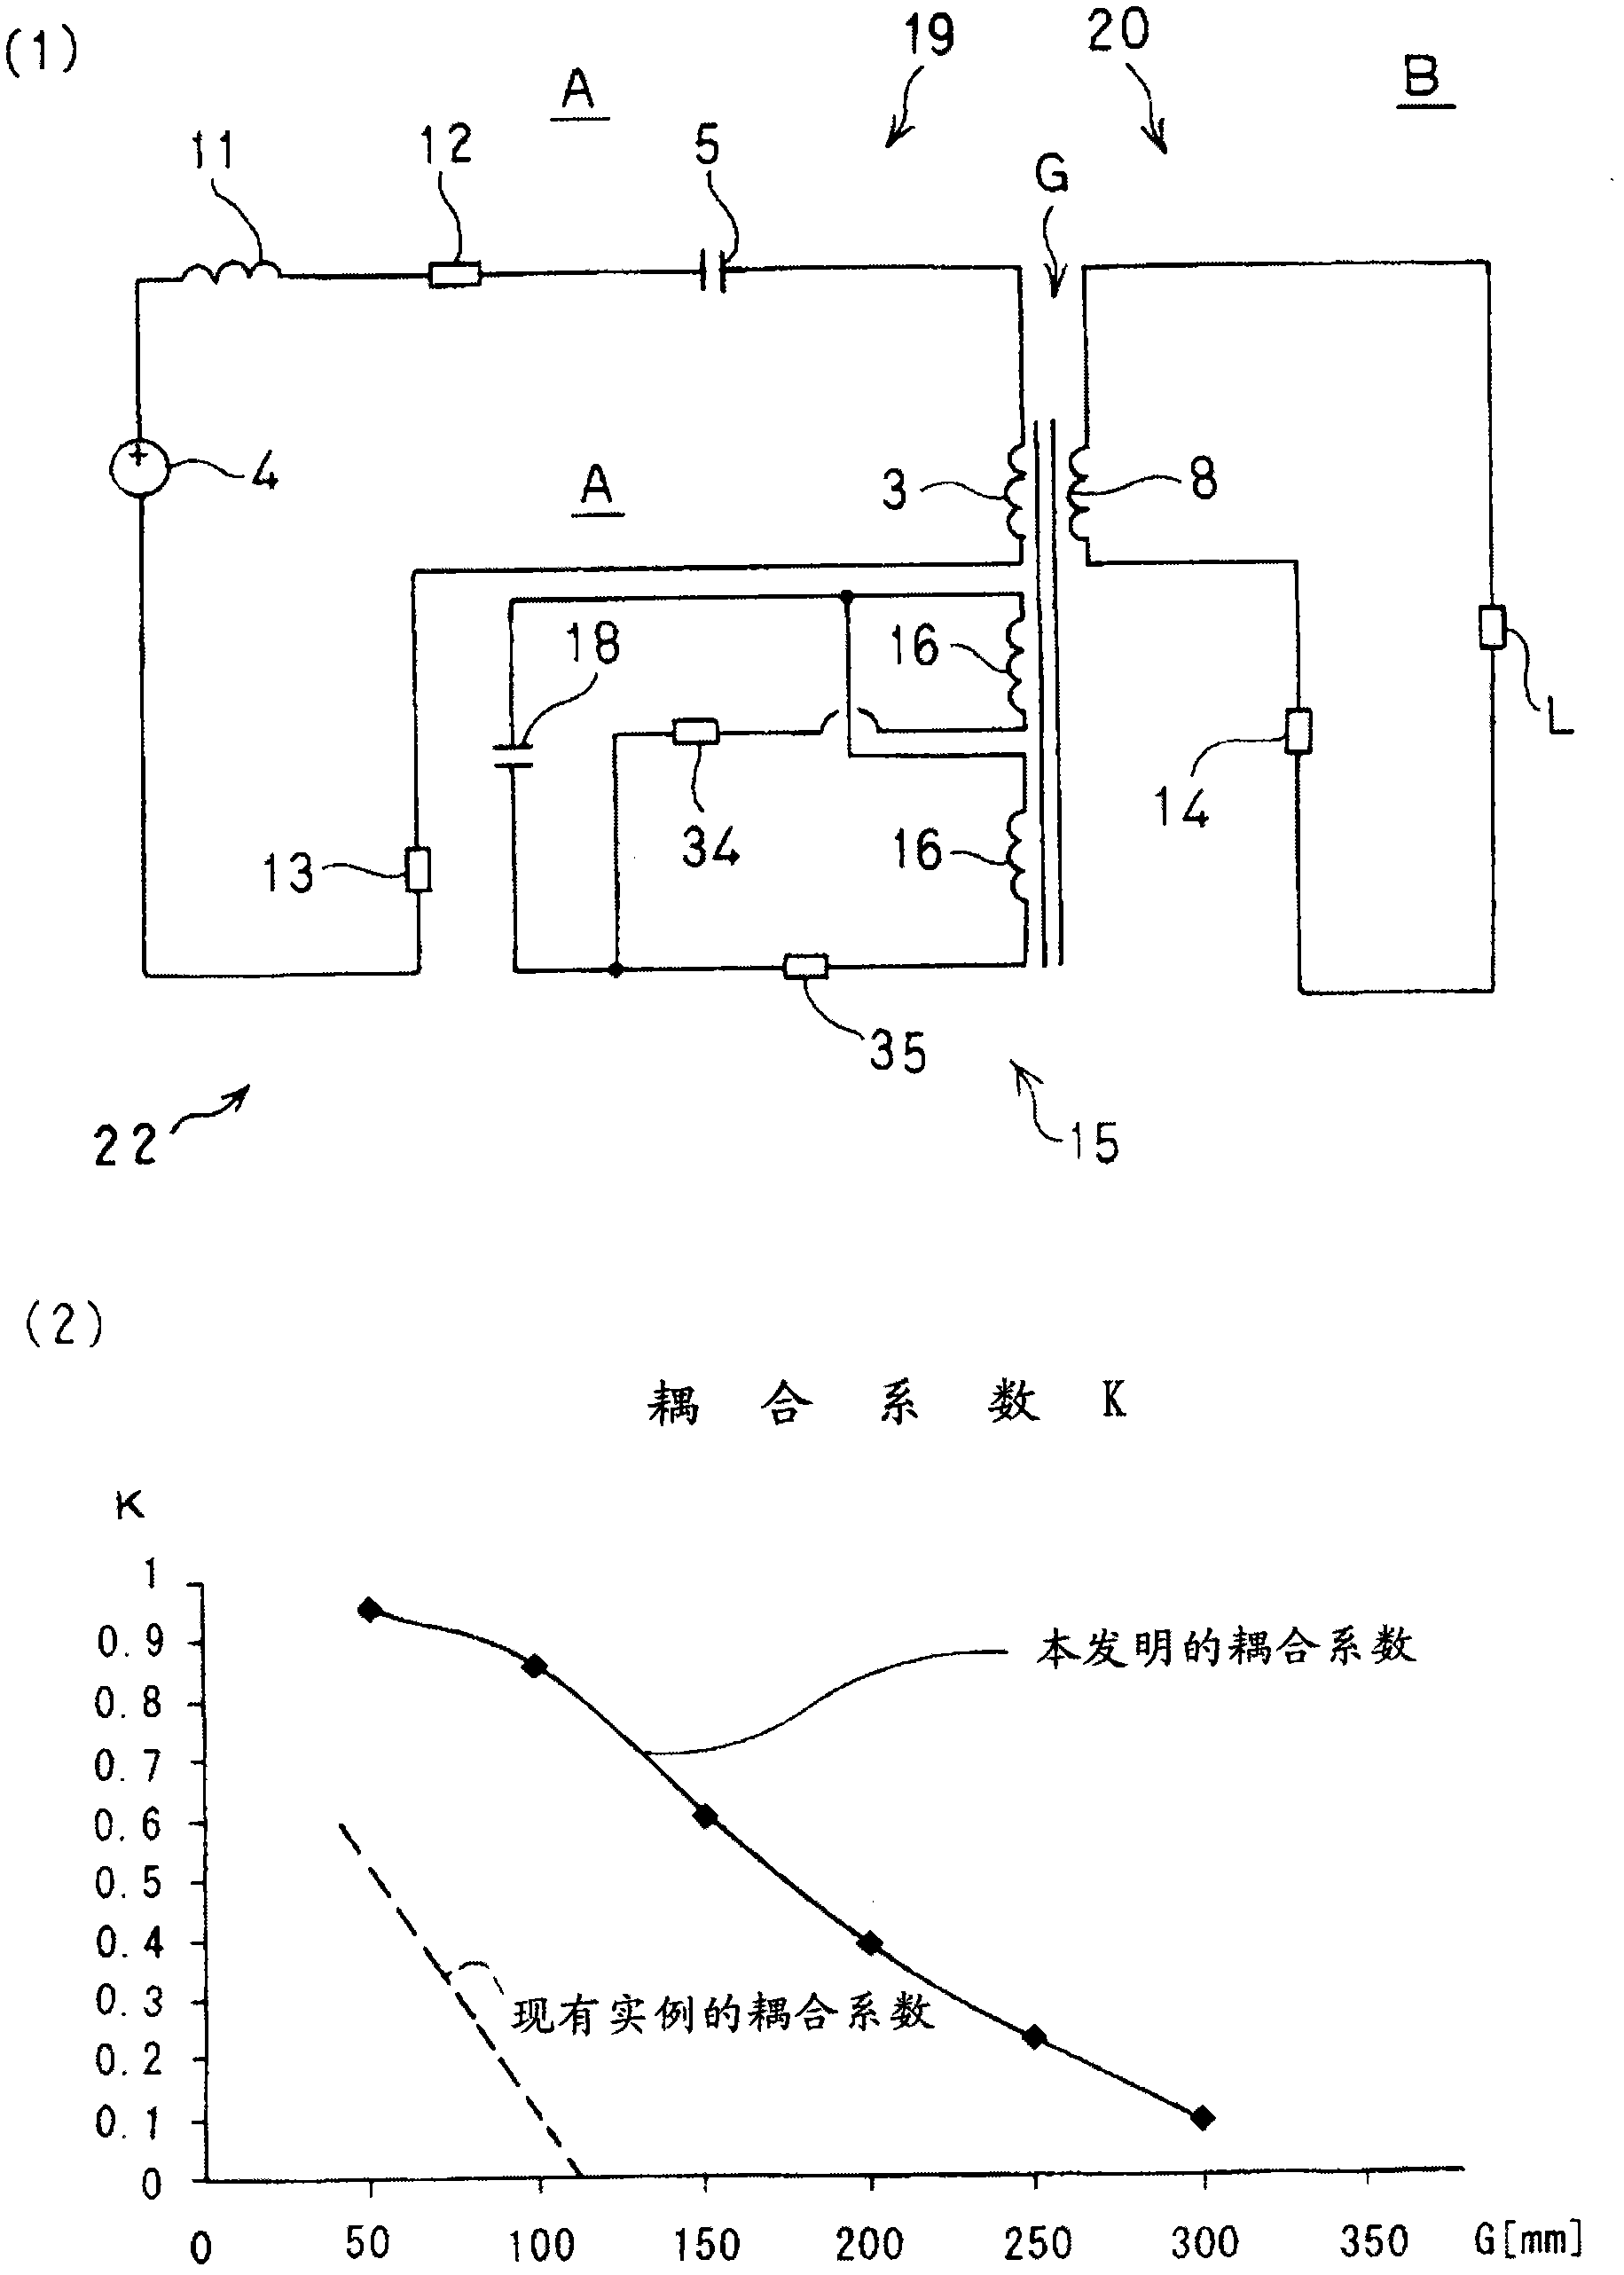 Contactless power supply device